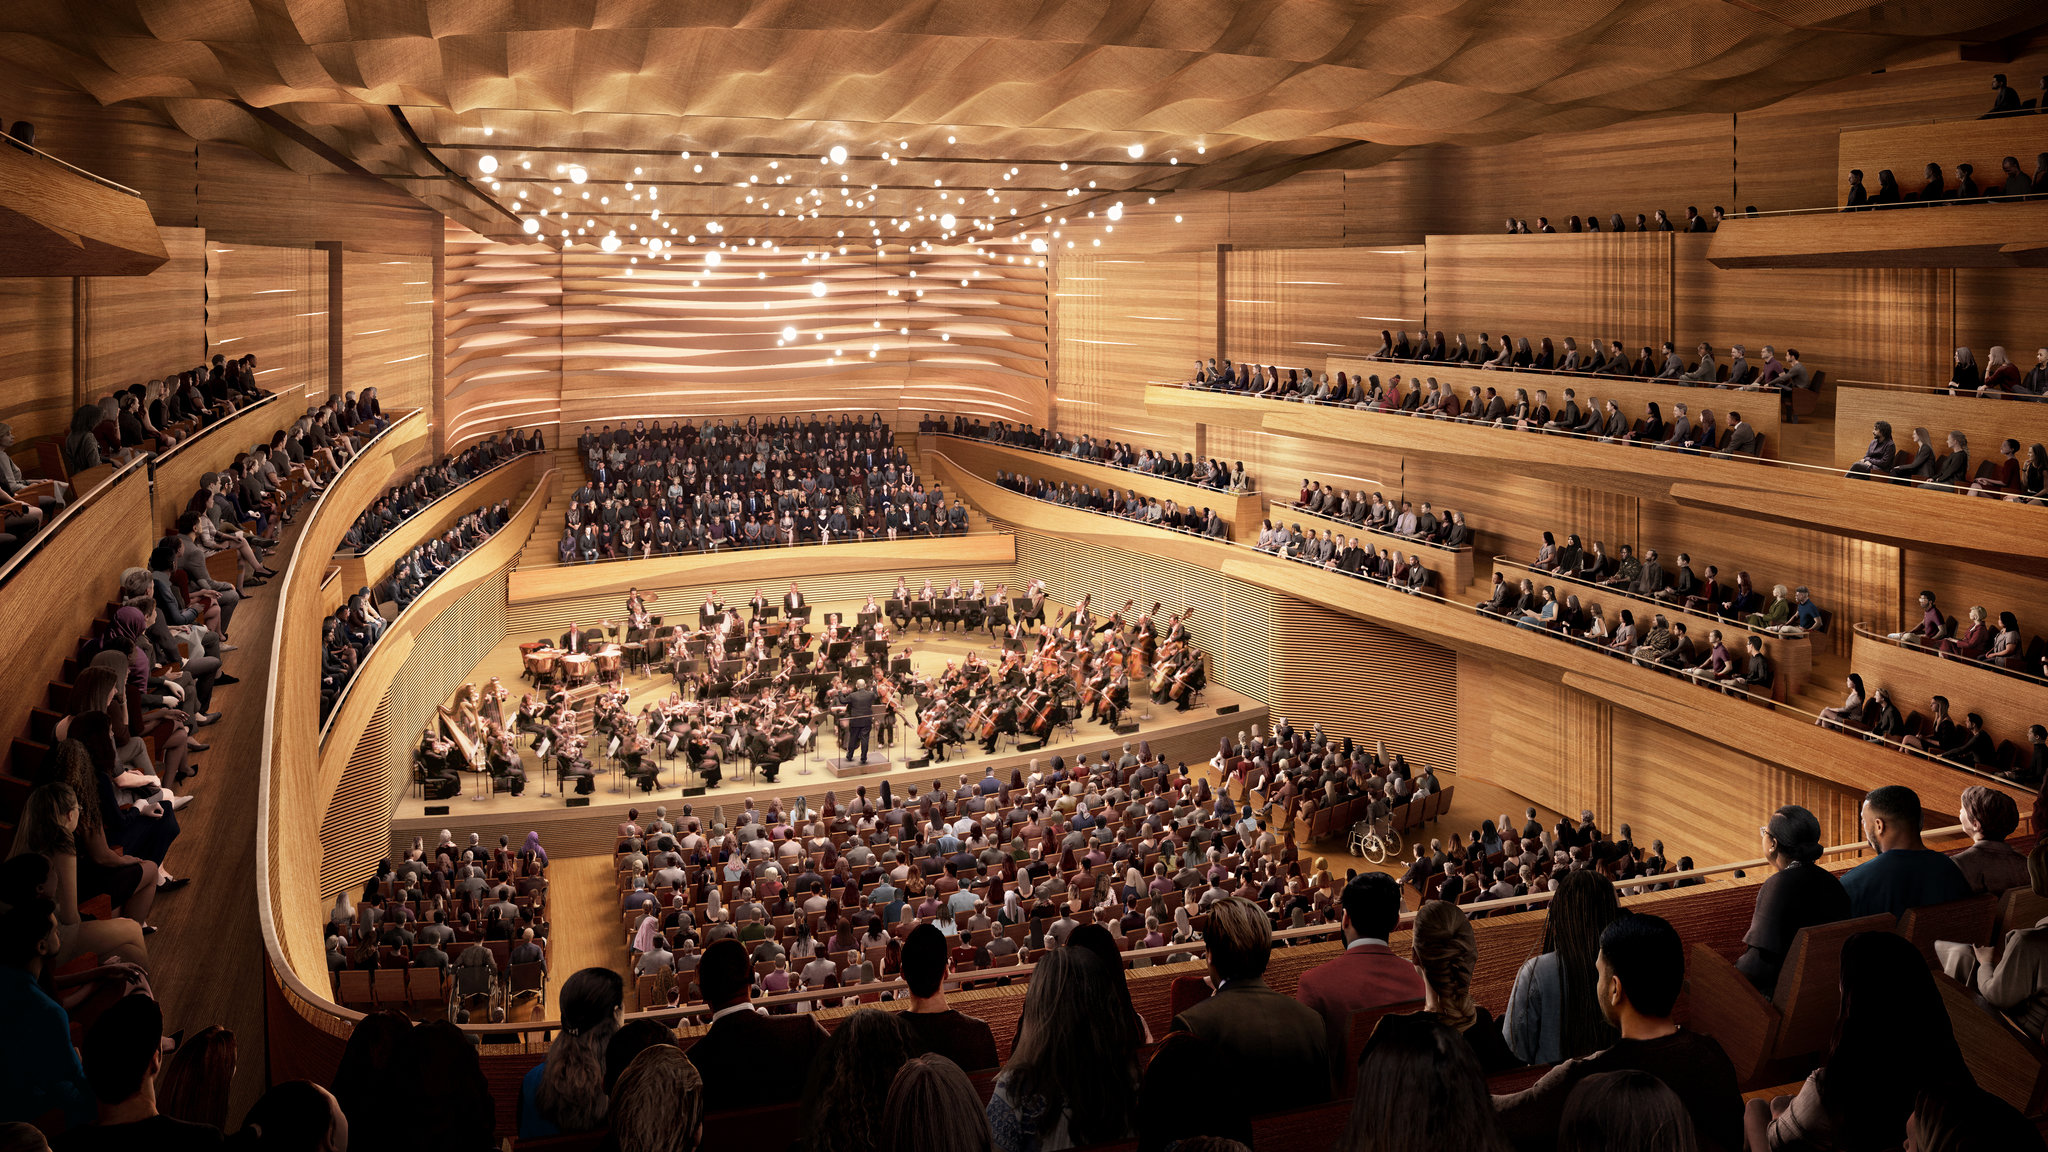 NY’s new hall will open two years early and at half price